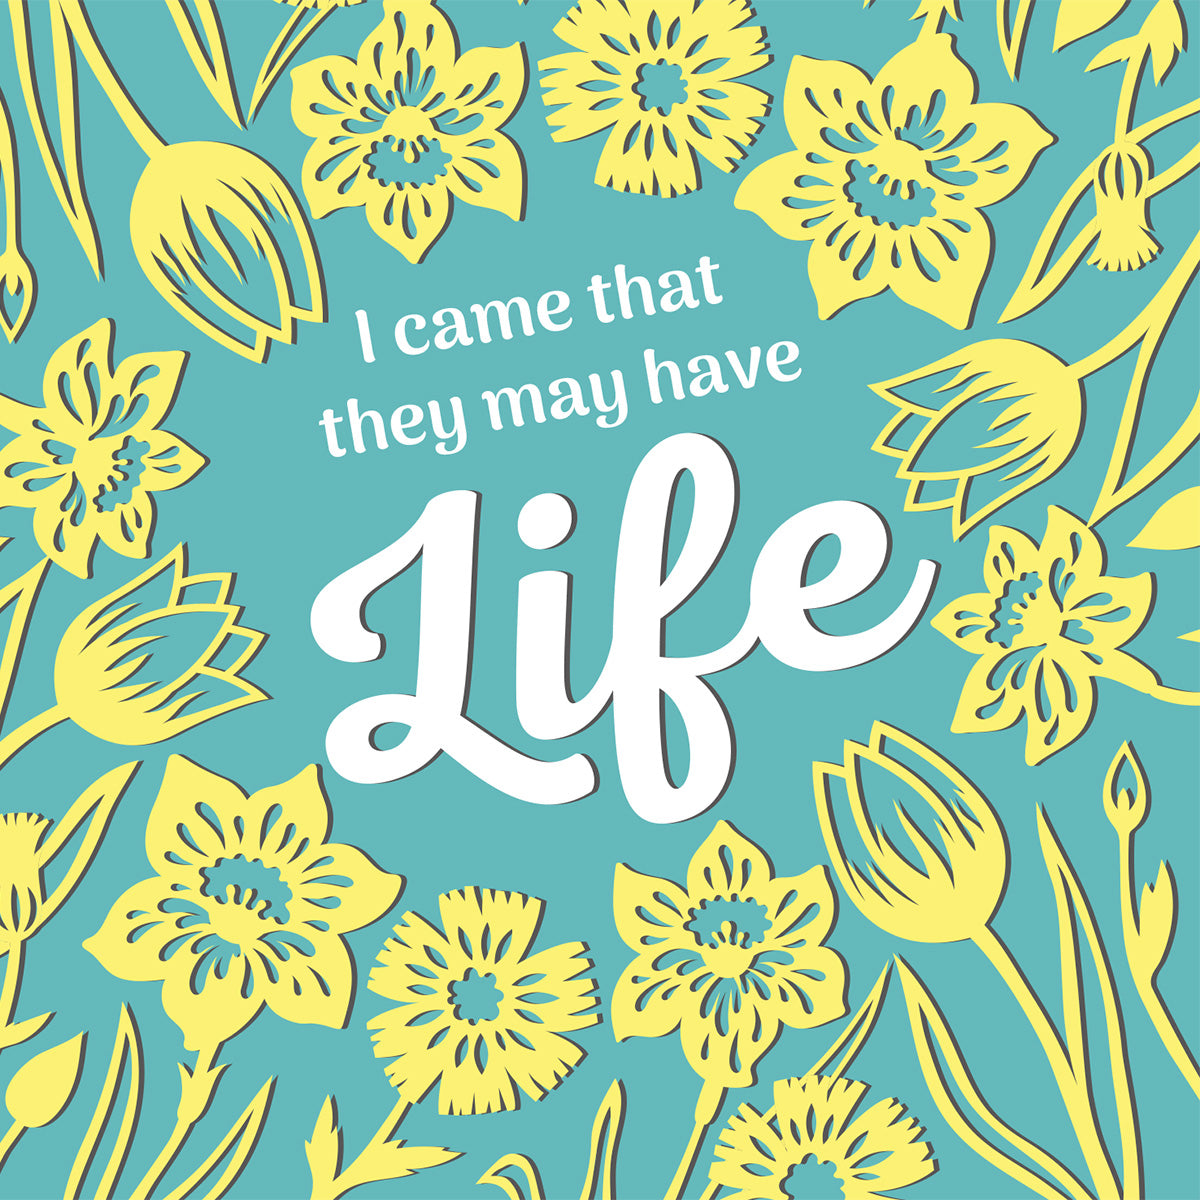 Compassion Charity Easter Cards - Life/John 10:10 (pack of 5) - The Christian Gift Company